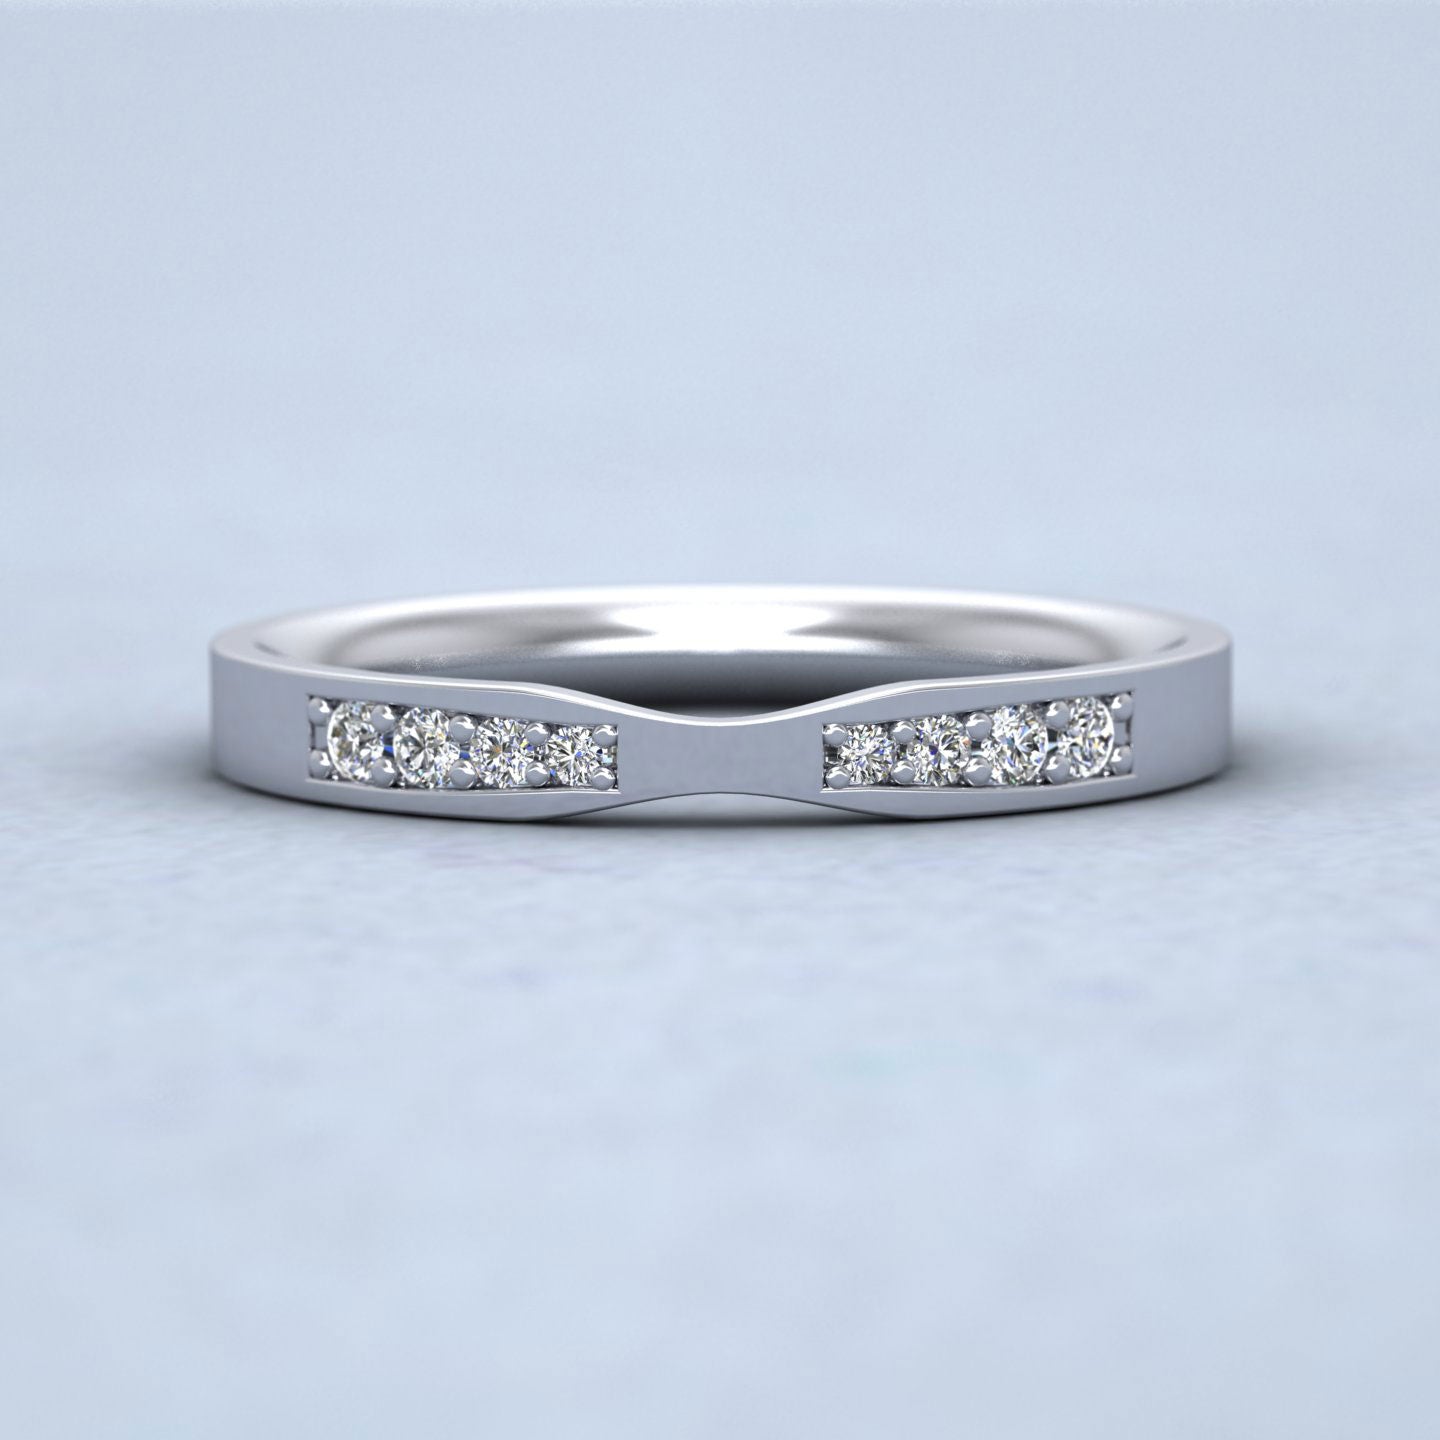 Pinch Shaped Wedding Ring In 9ct White Gold 2.5mm Wide